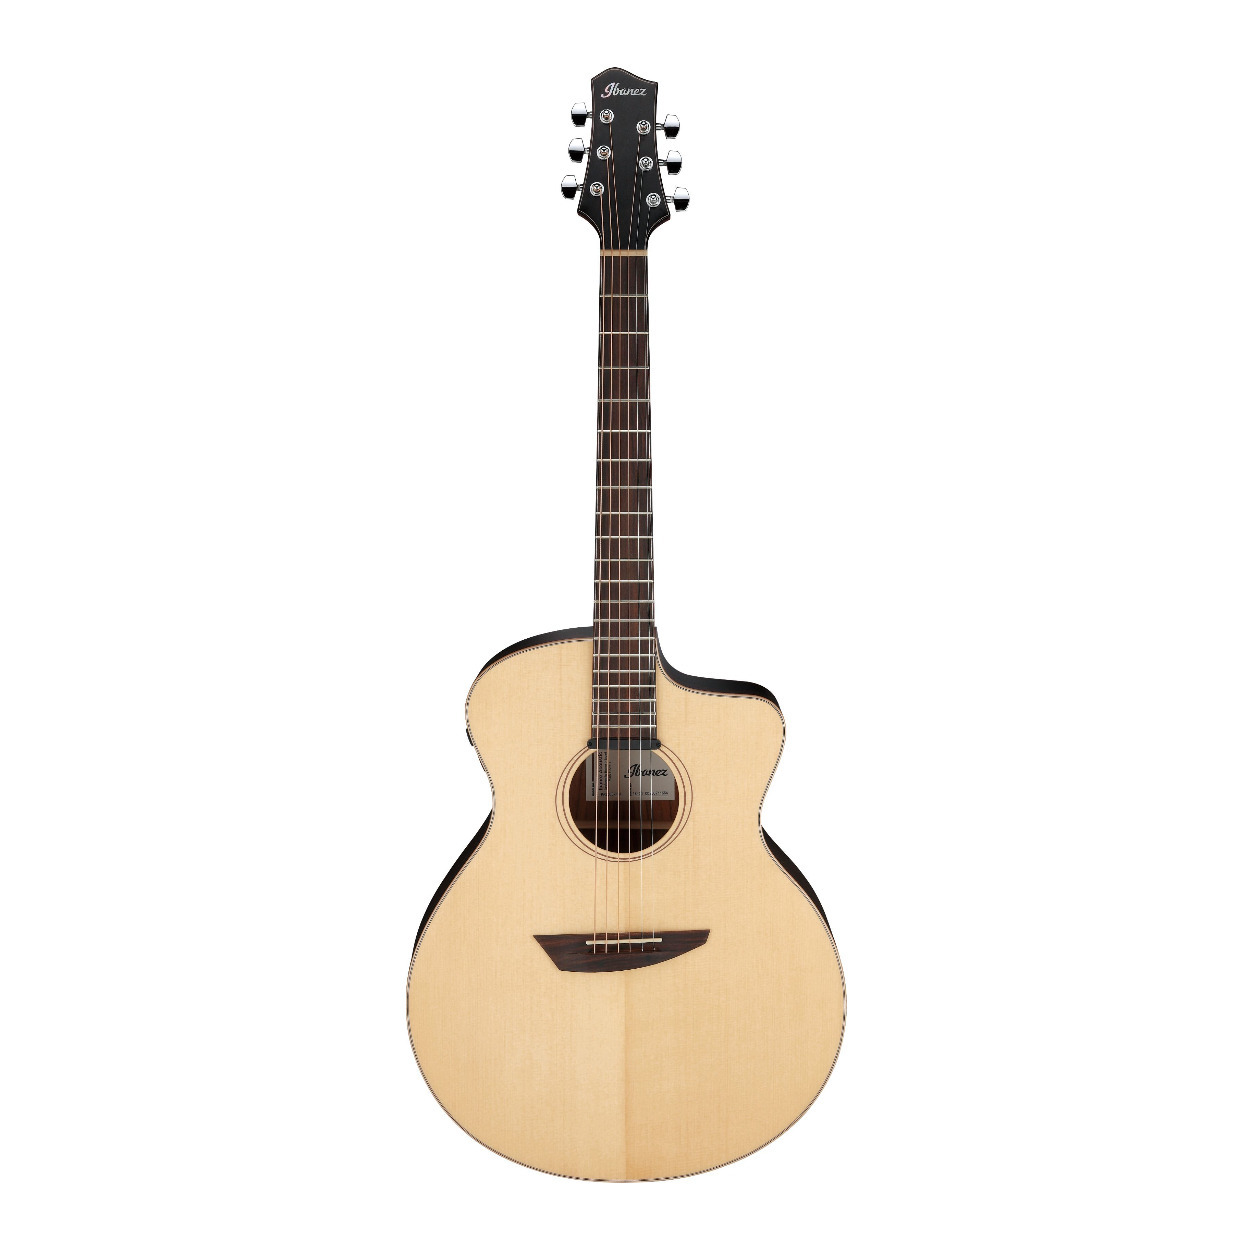 Ibanez PA300E 6-String Acoustic Electric Guitar (Right Hand, Natural Satin) in Brown -  PA300ENSL